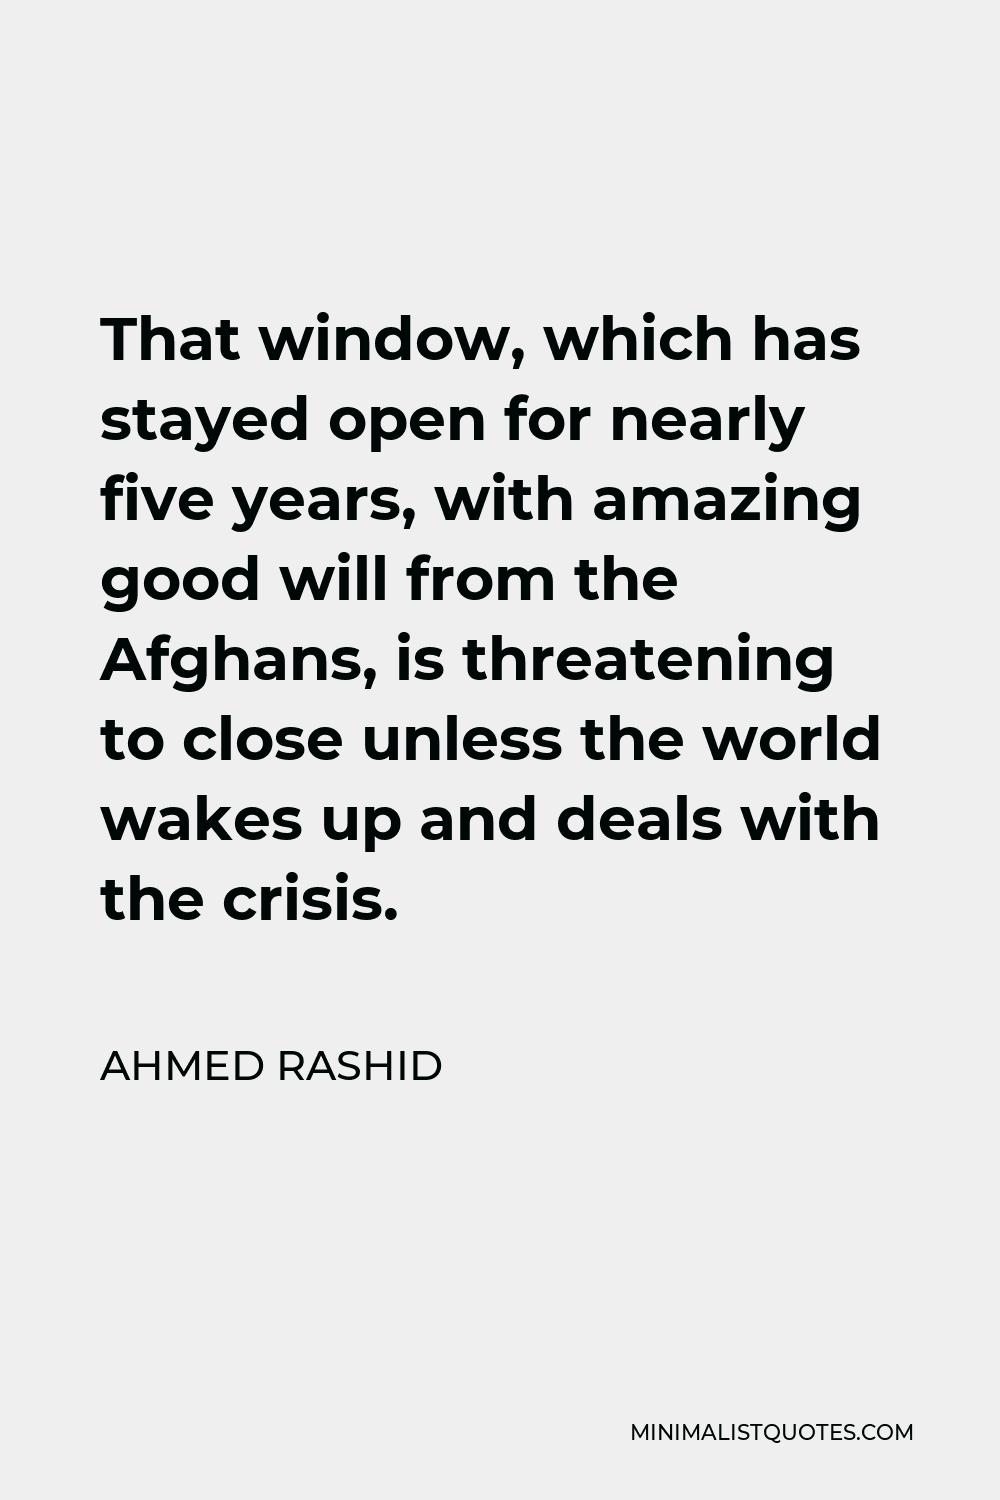 Ahmed Rashid Quote - That window, which has stayed open for nearly five years, with amazing good will from the Afghans, is threatening to close unless the world wakes up and deals with the crisis.